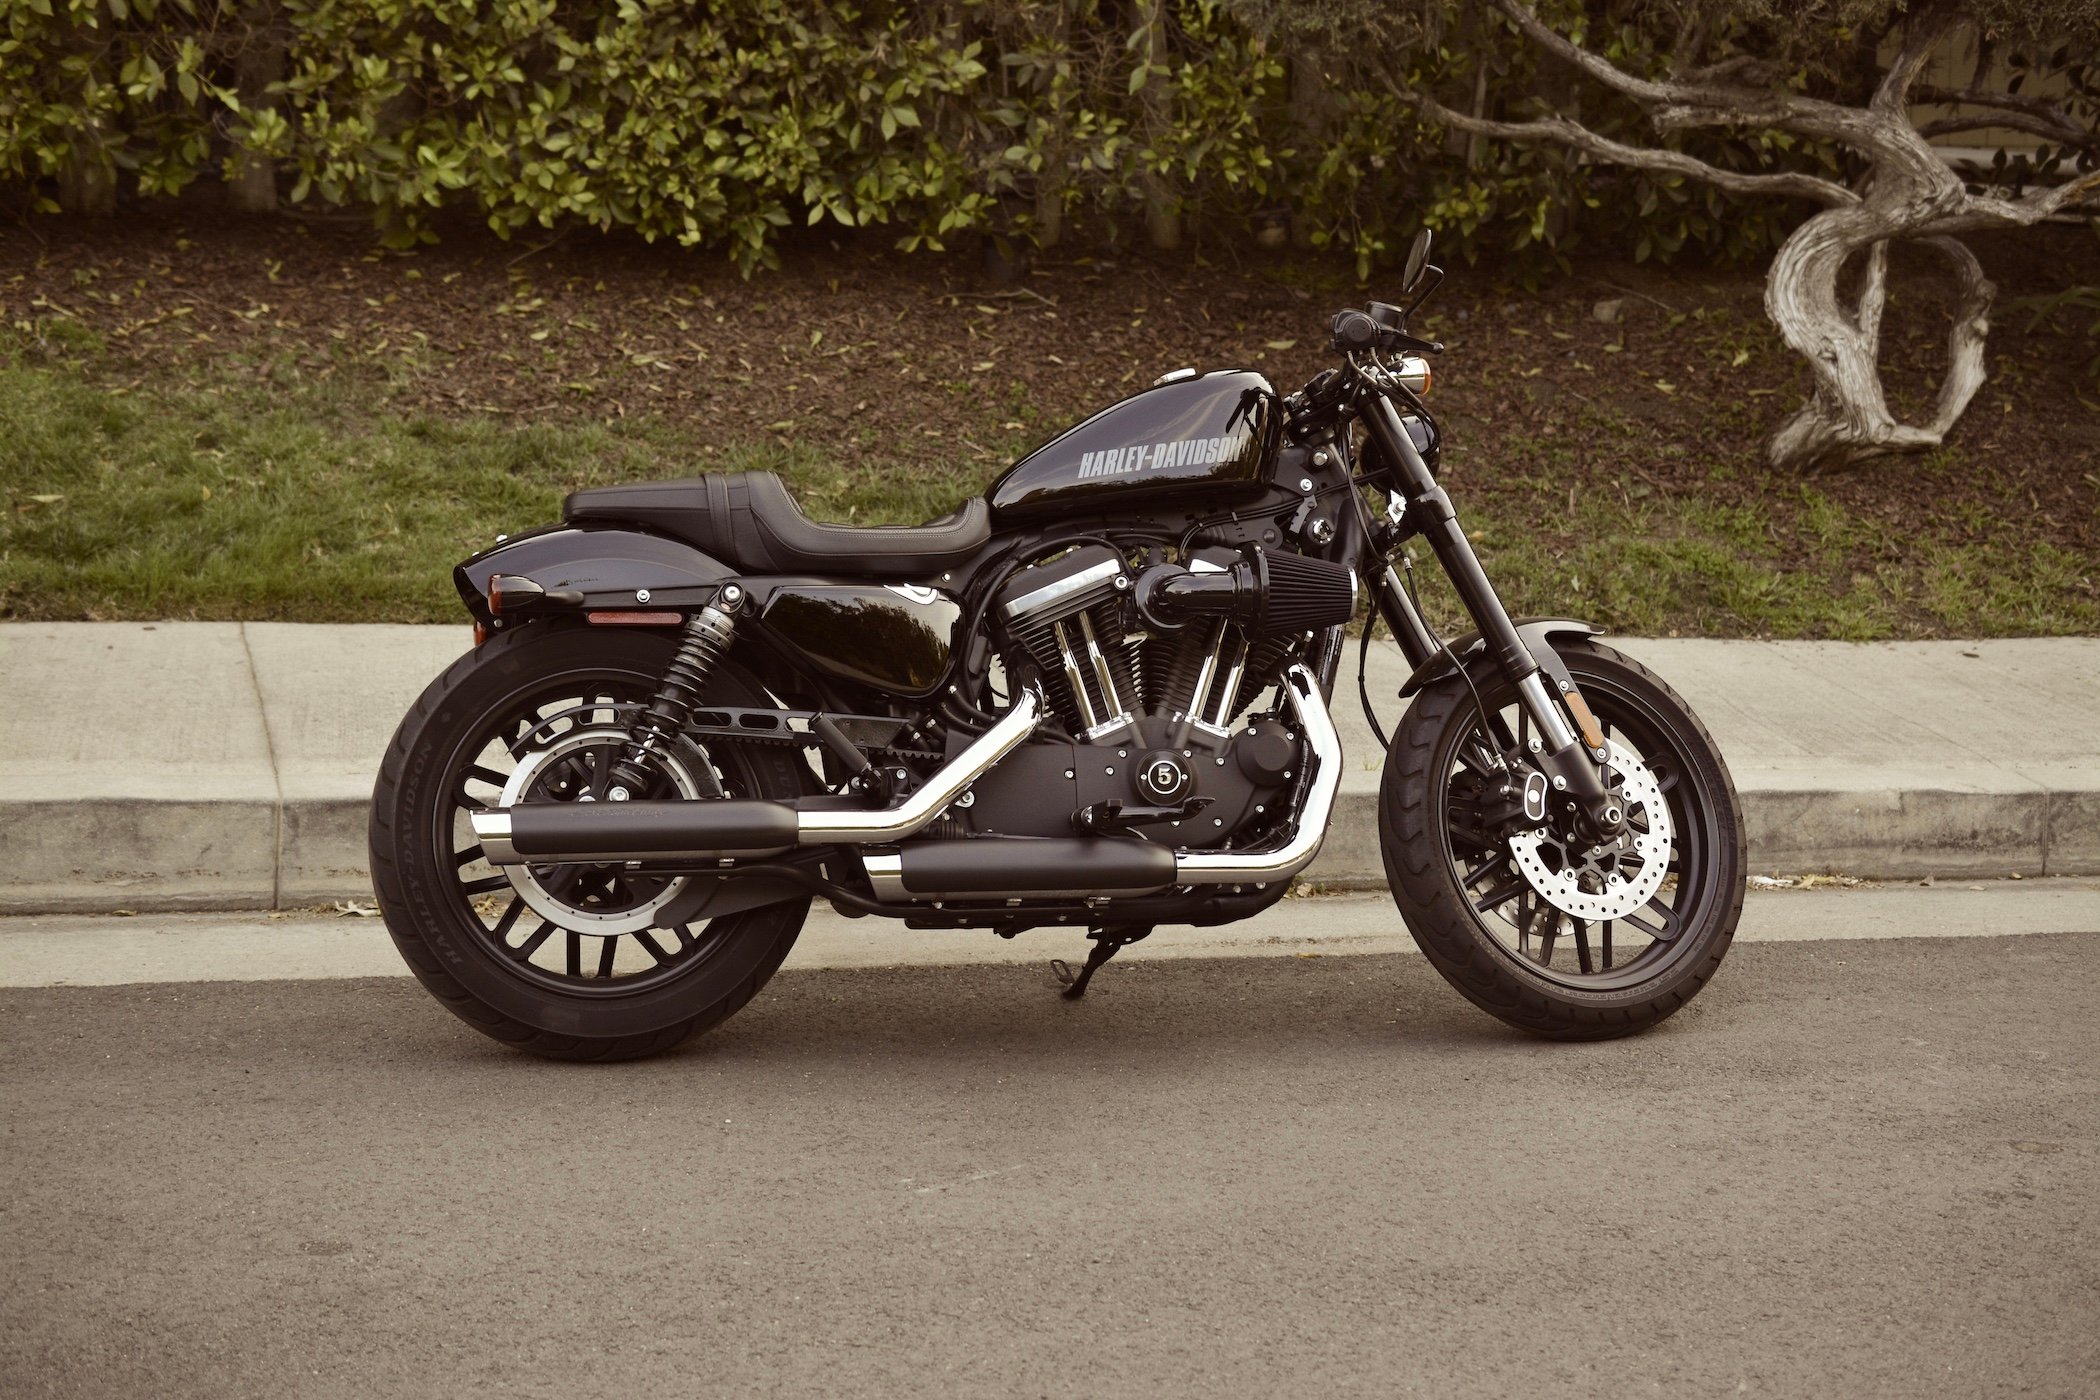 2021 Harley-Davidson Sportster S First Ride Review - Canada Moto Guide